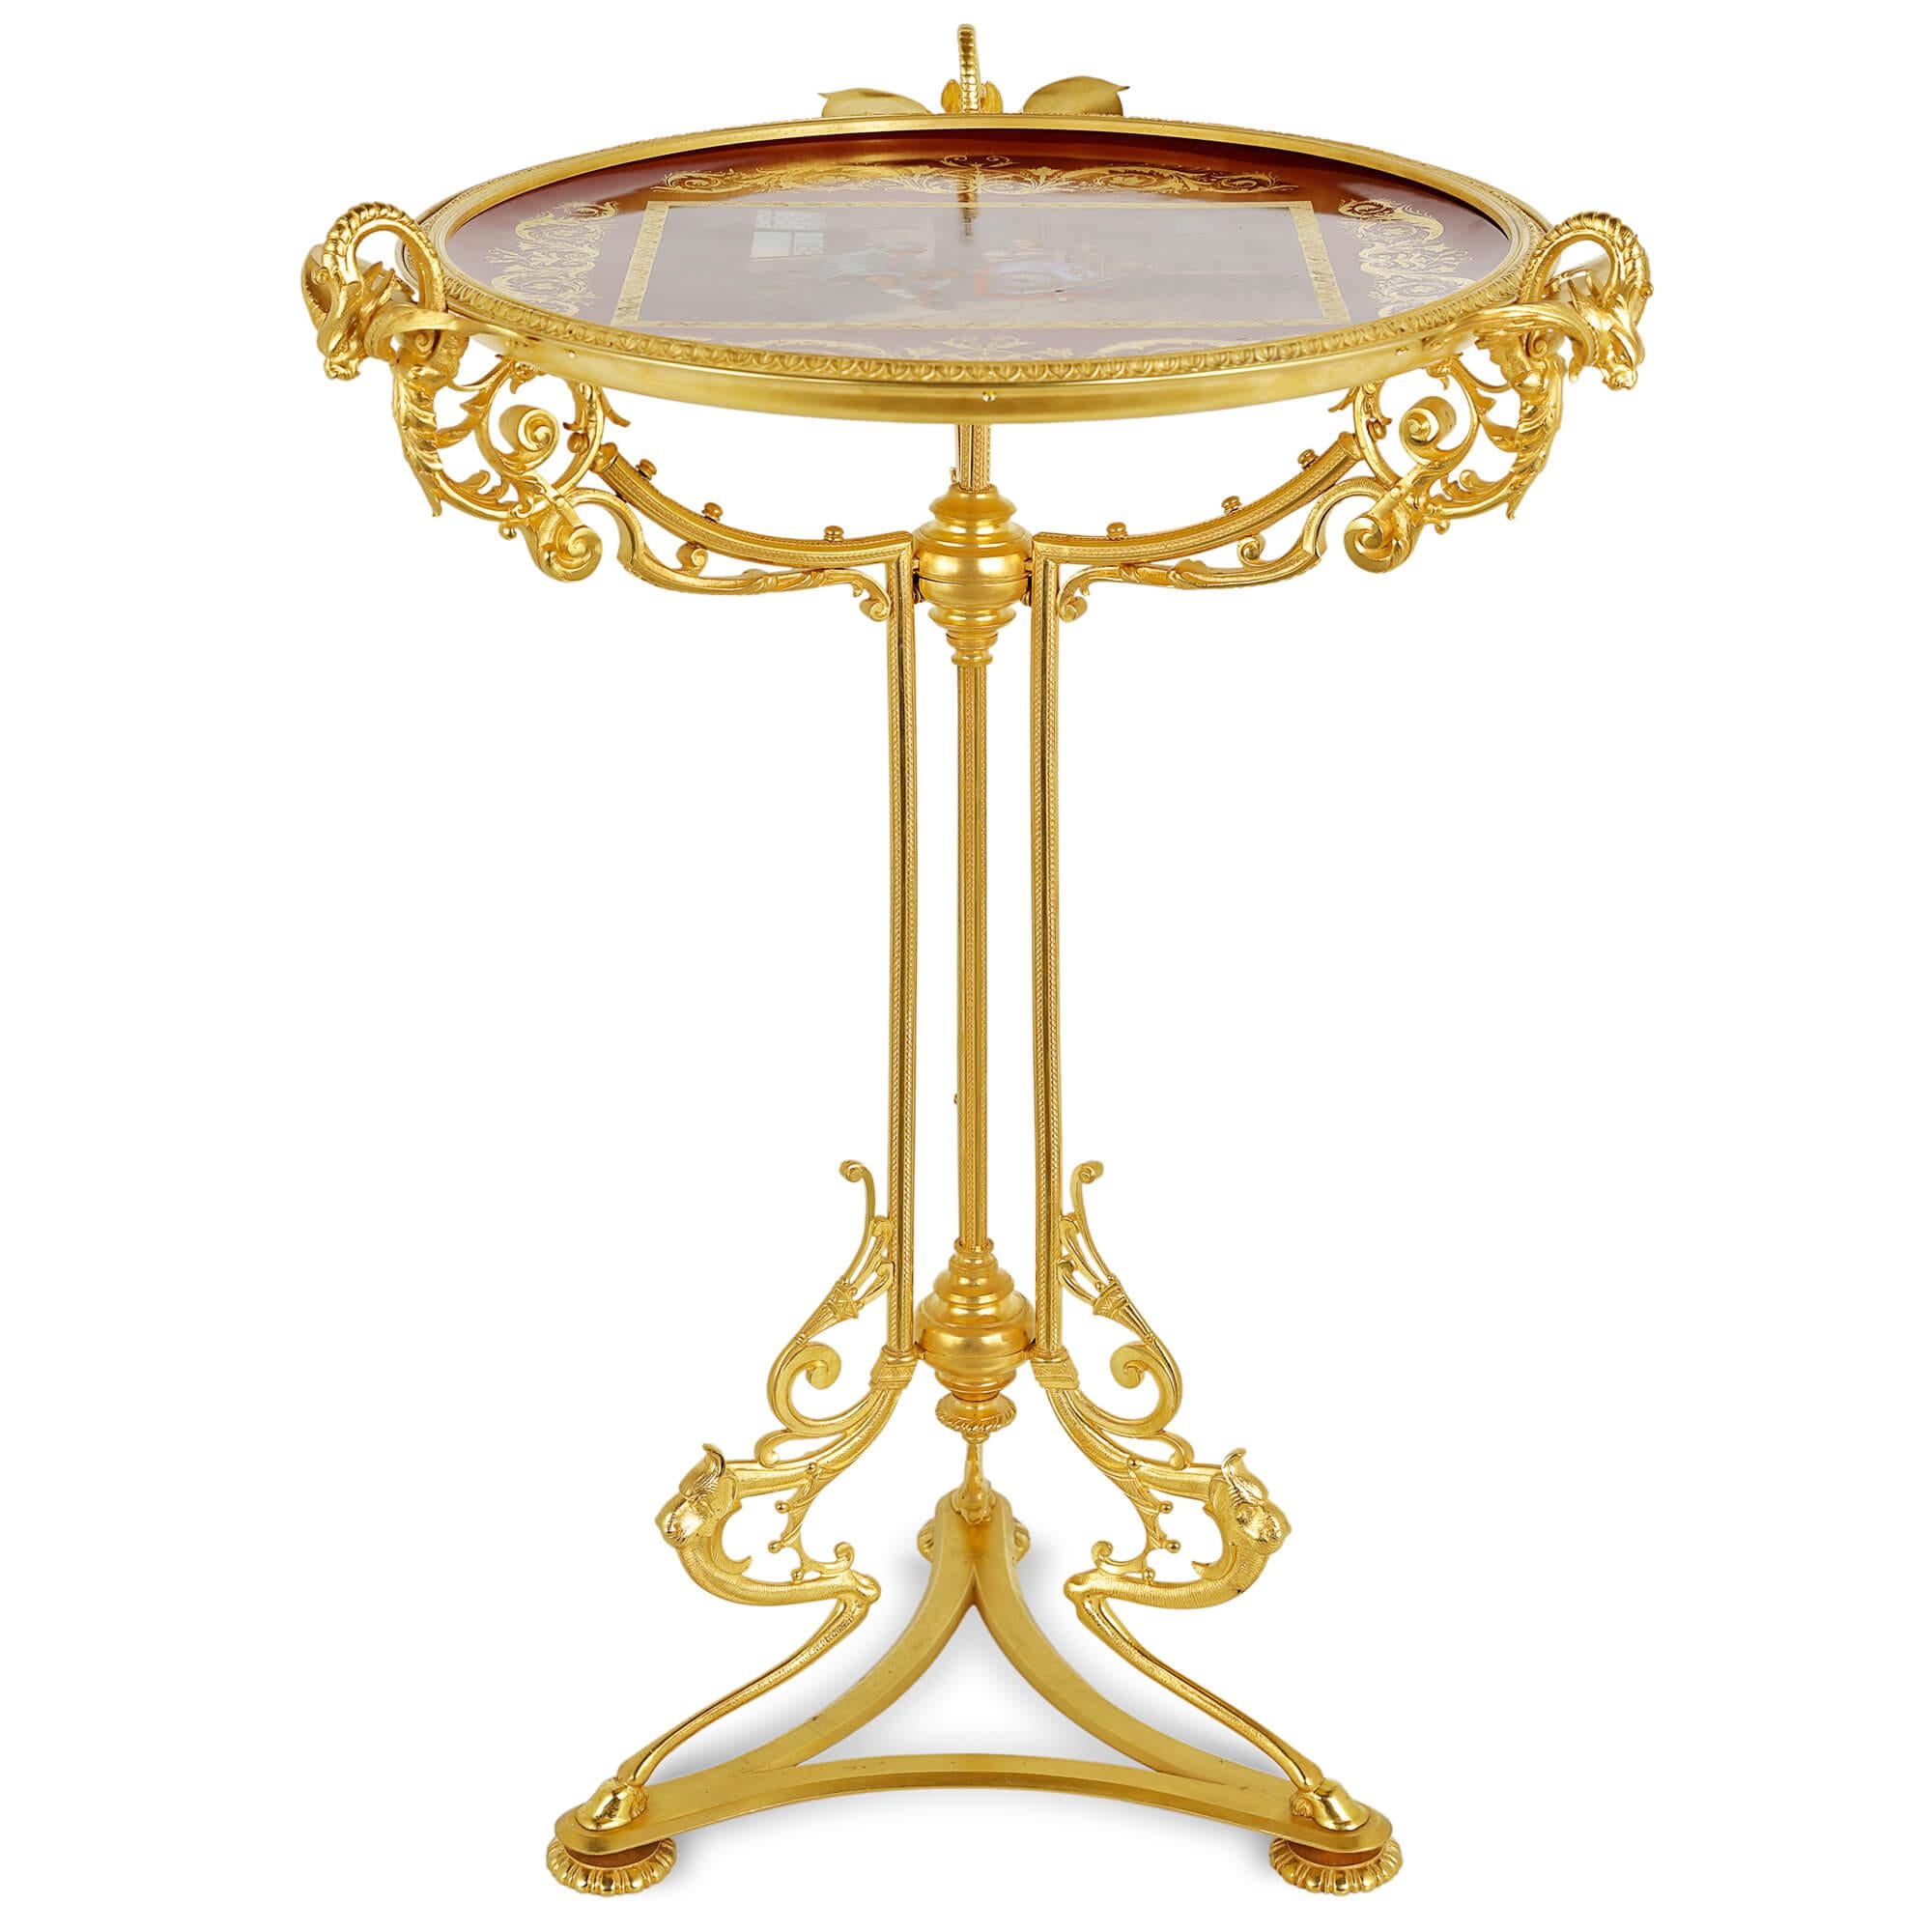 Chinoiserie Royal Vienna Porcelain and Gilt Bronze Circular Side Table For Sale